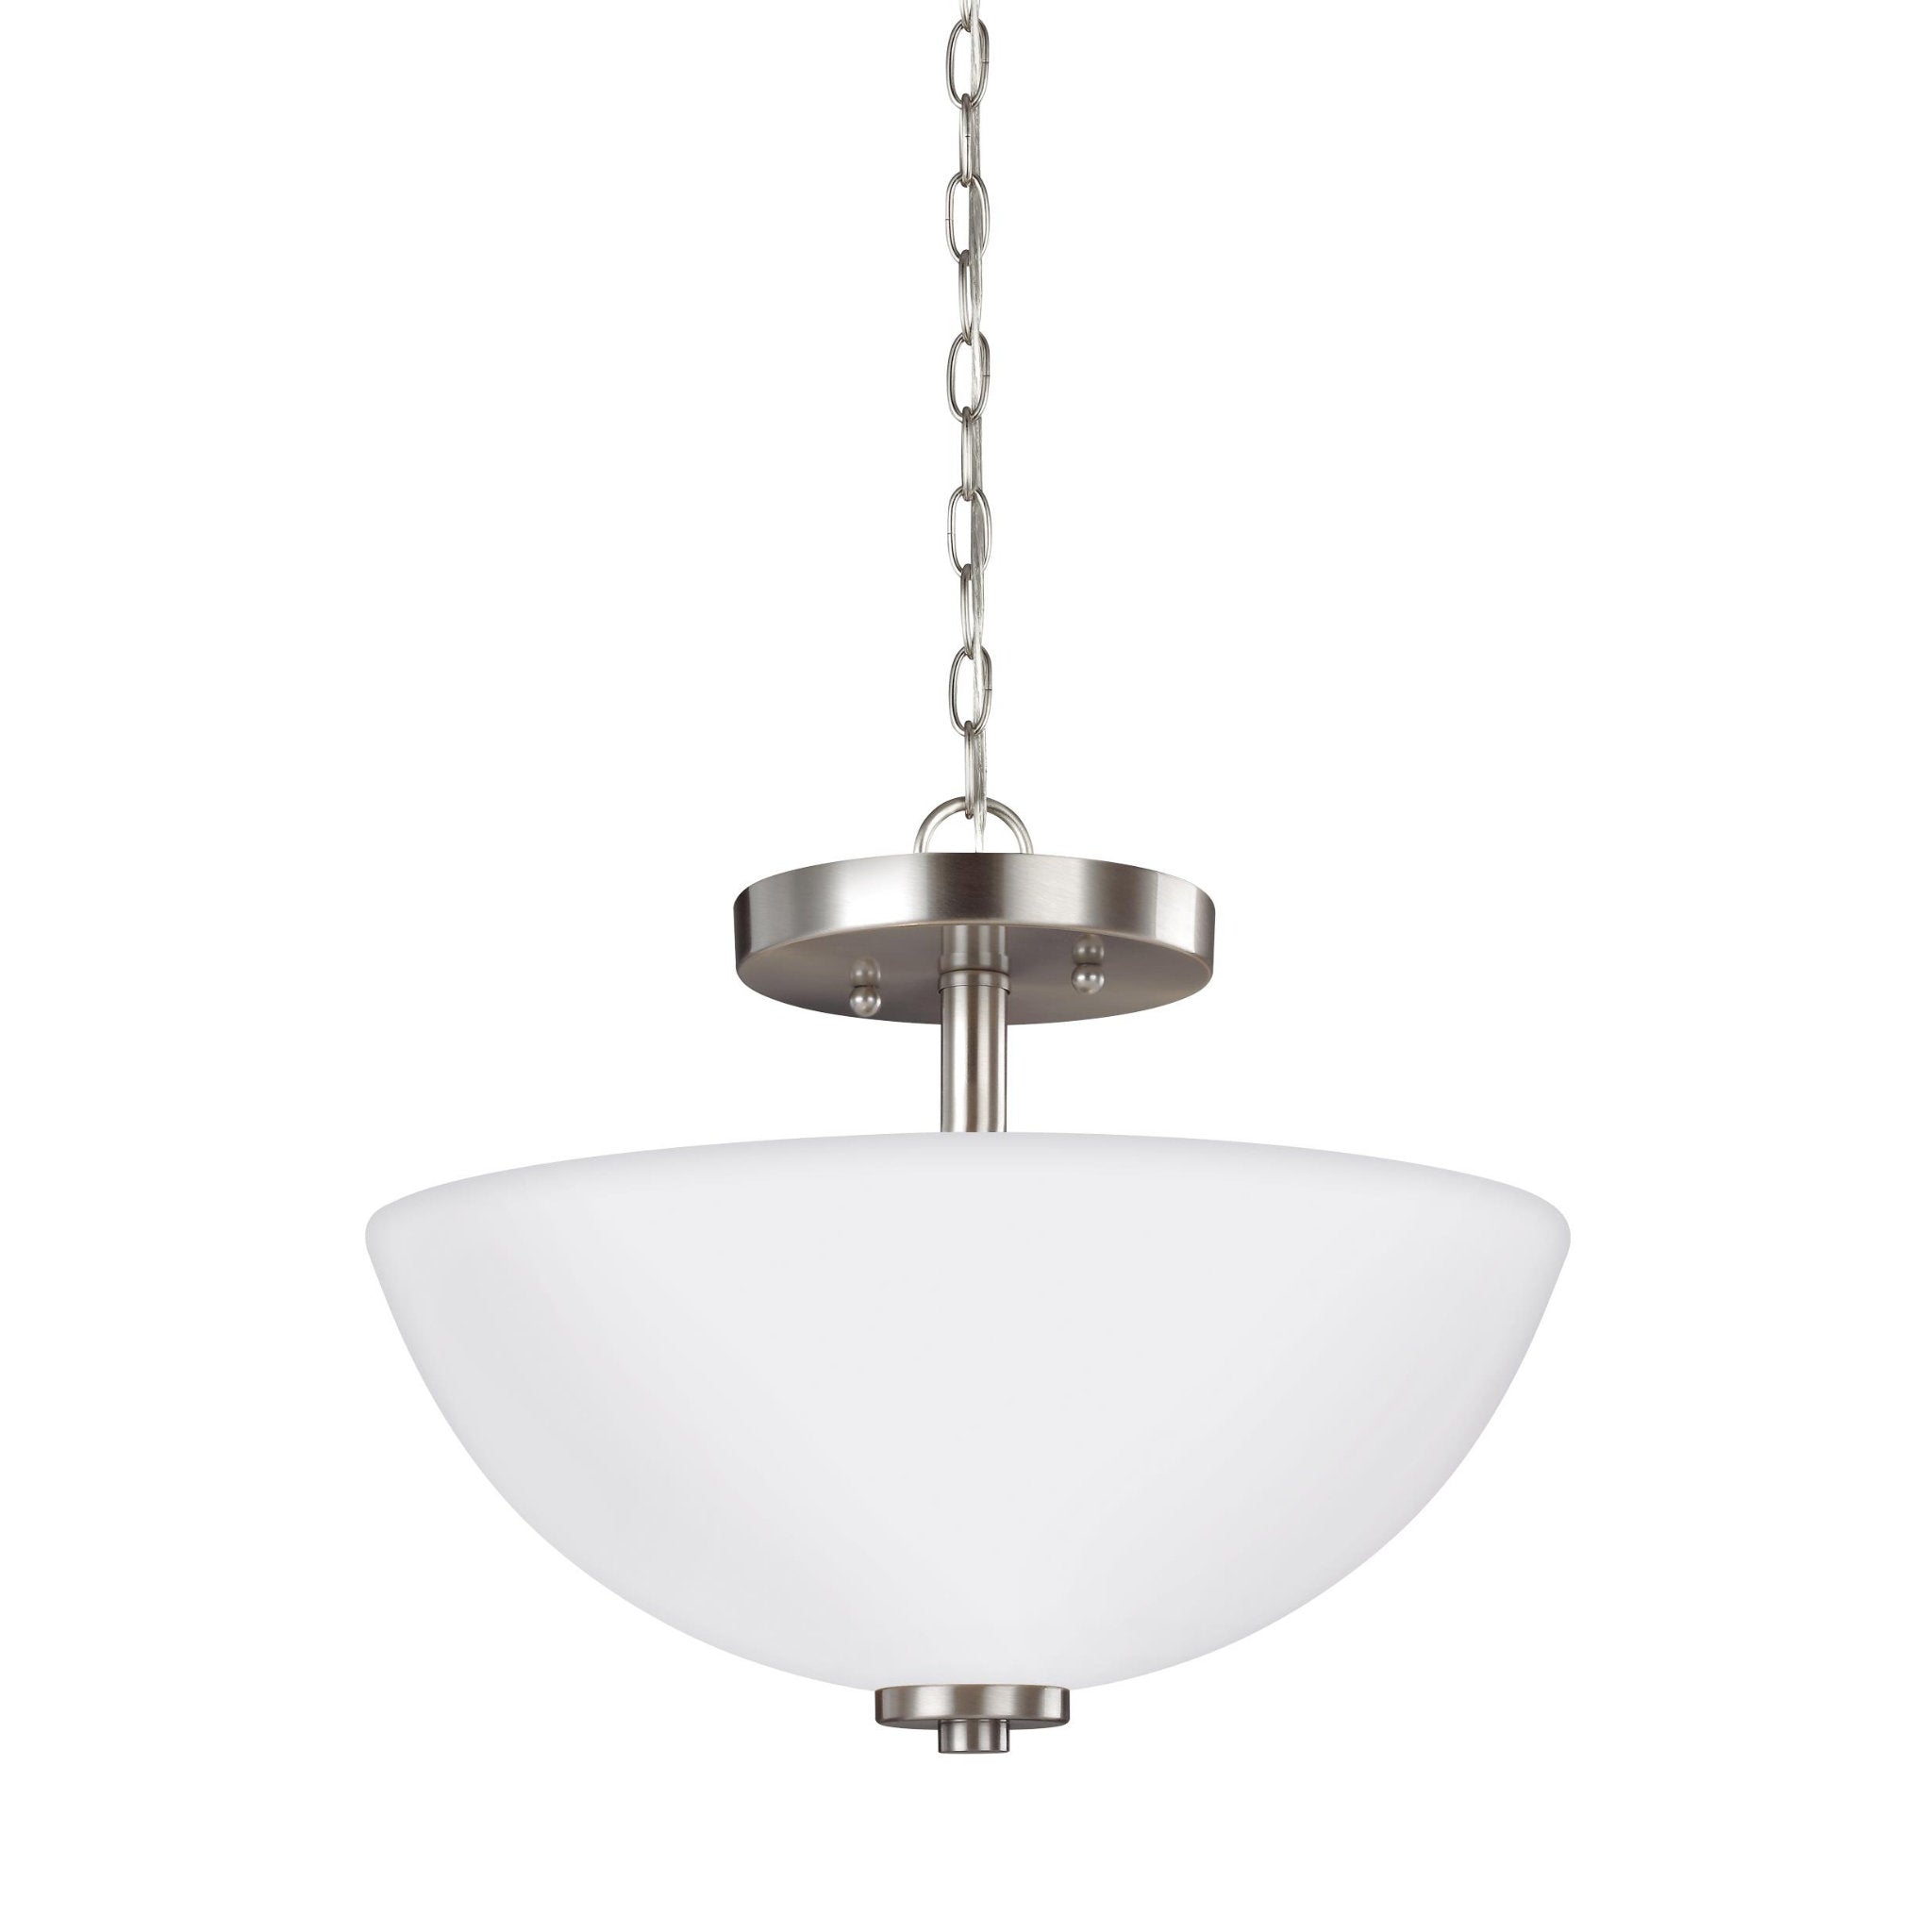 Oslo Two Light Semi-Flush Convertible Pendant LED Contemporary Ceiling Fixture 11.25" Height Steel Round Etched / White Inside Shade in Brushed Nickel